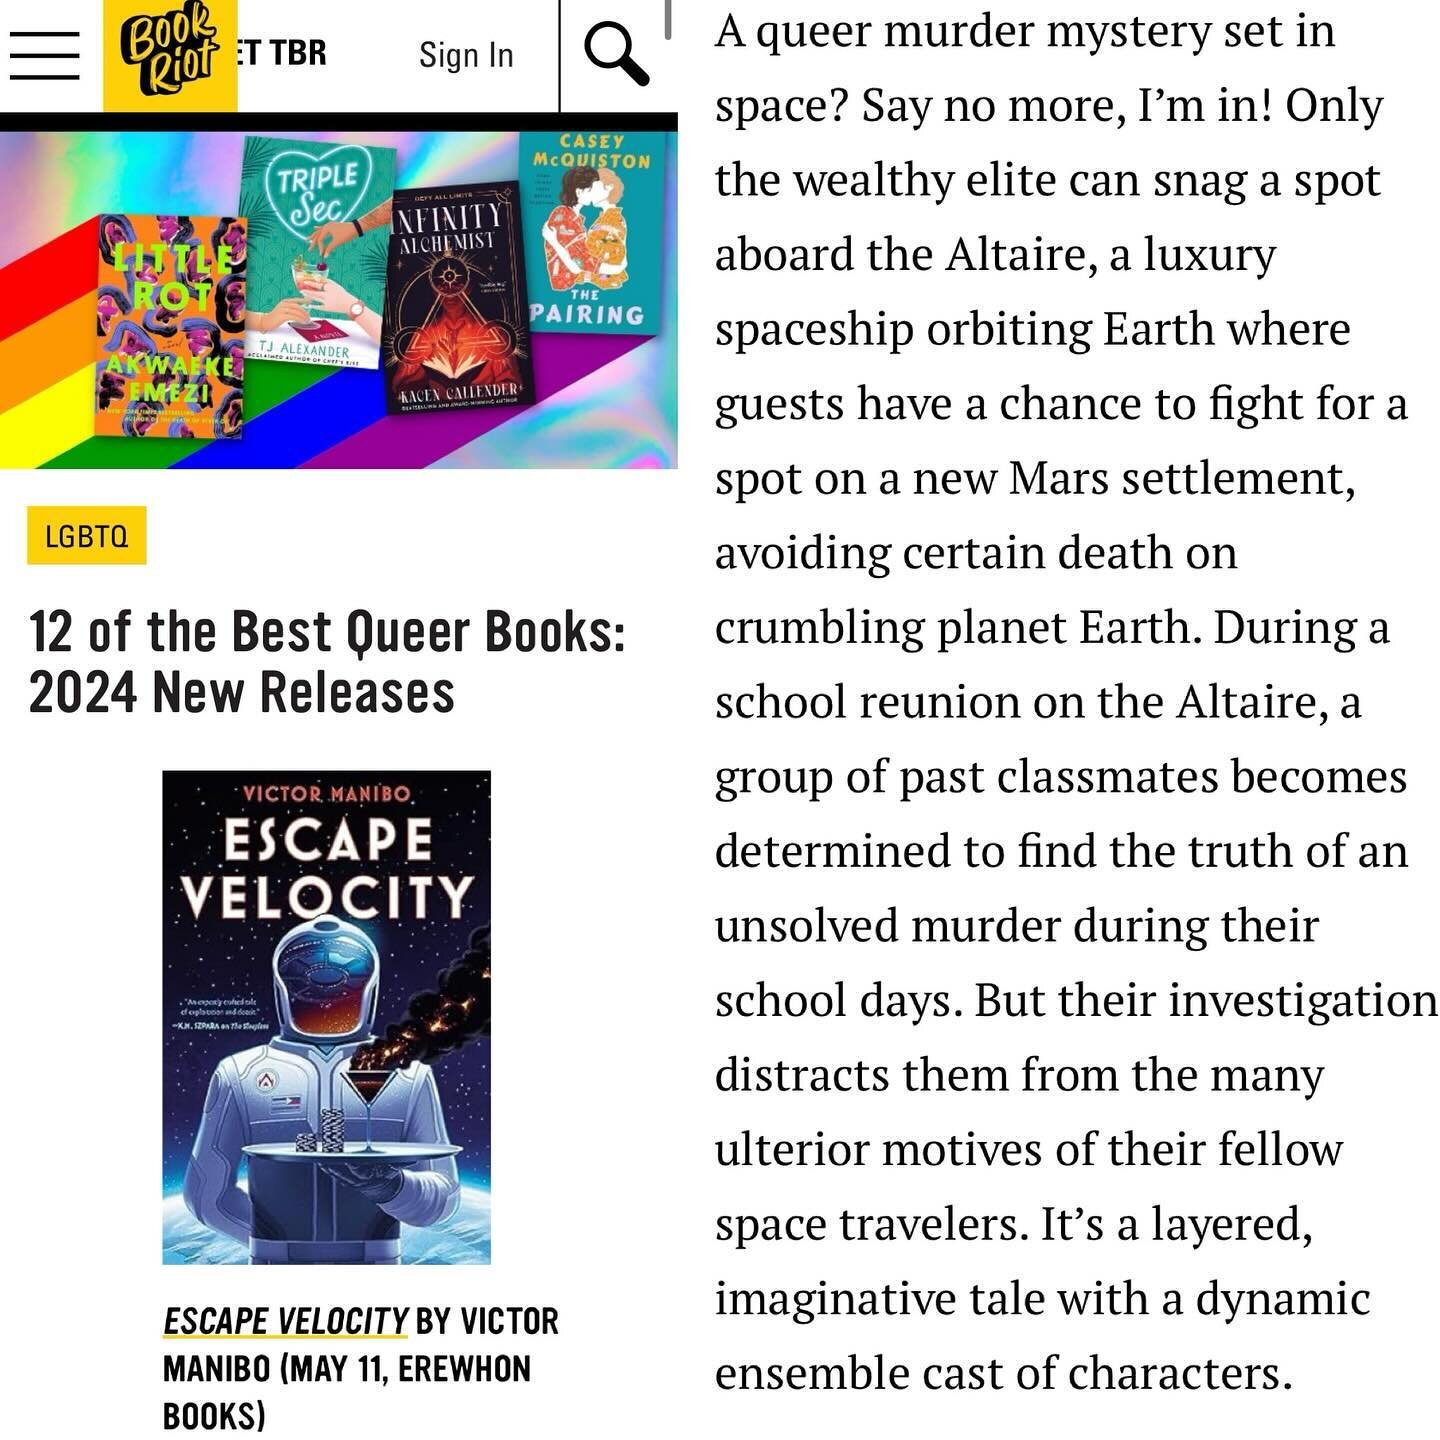 Thanks so much, @bookriot, for including ESCAPE VELOCITY on this list! So excited for everyone to meet the queer disasters aboard Space Habitat Altaire! Link in ig story; NB release date is 5/21/24